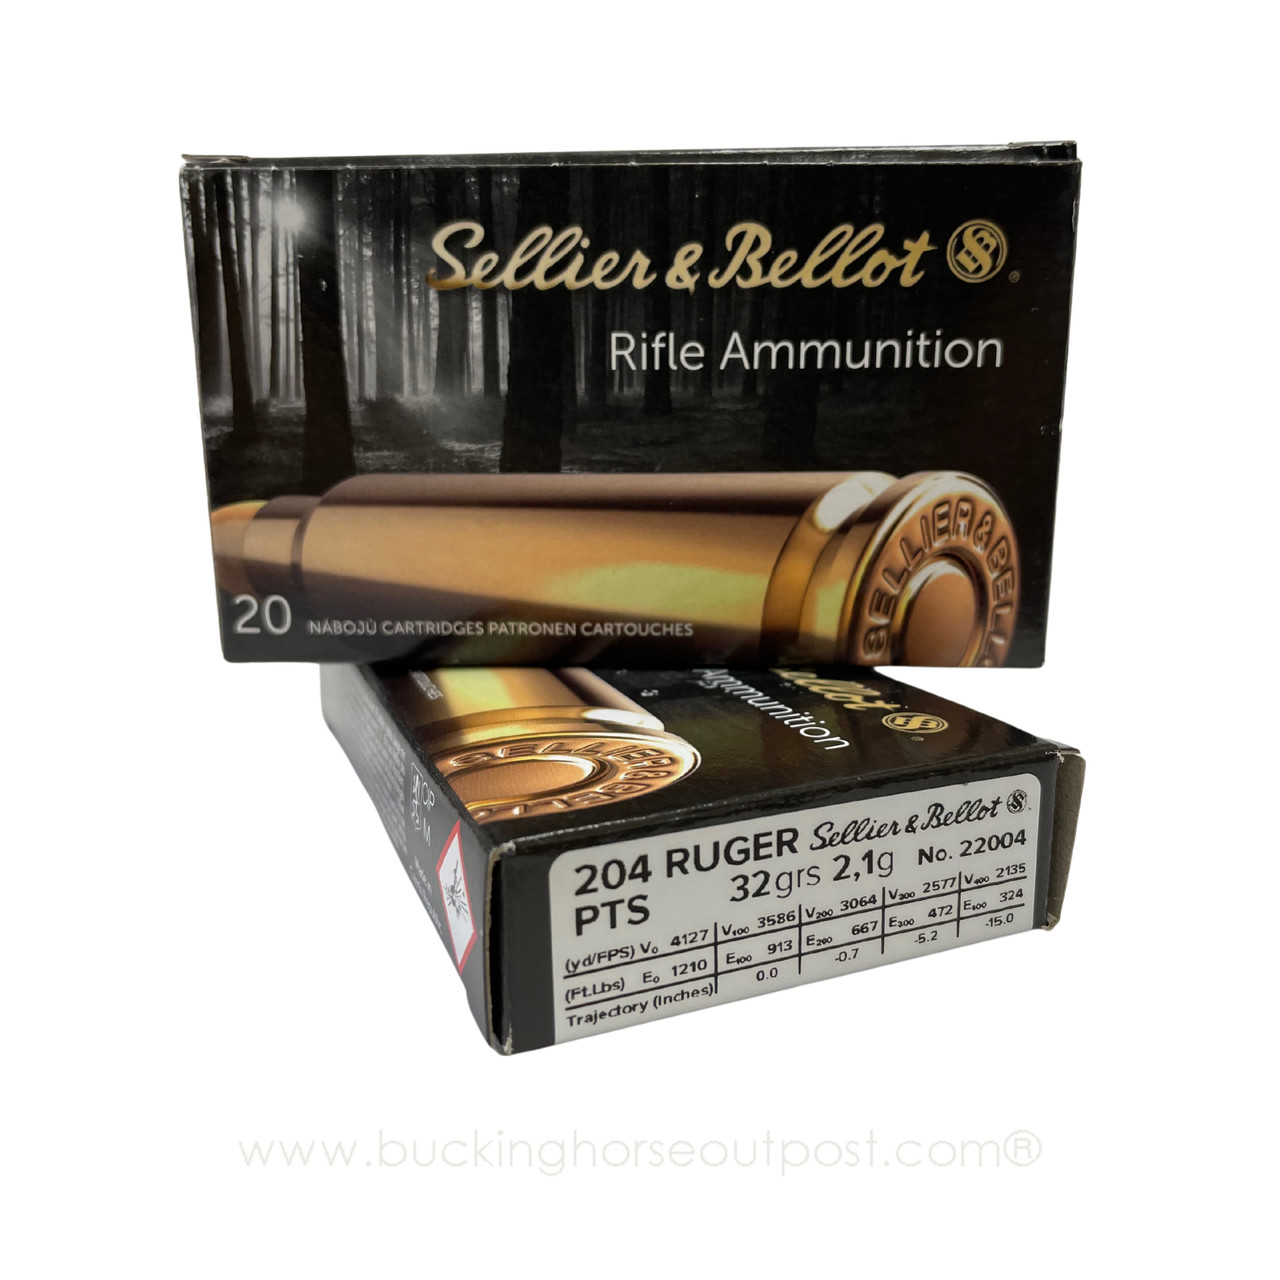 Sellier & Bellot .204 Ruger 32 Grain Plastic Tip Special 20rds Per Box (SB204A) - FREE SHIPPING ON ORDERS OVER $175